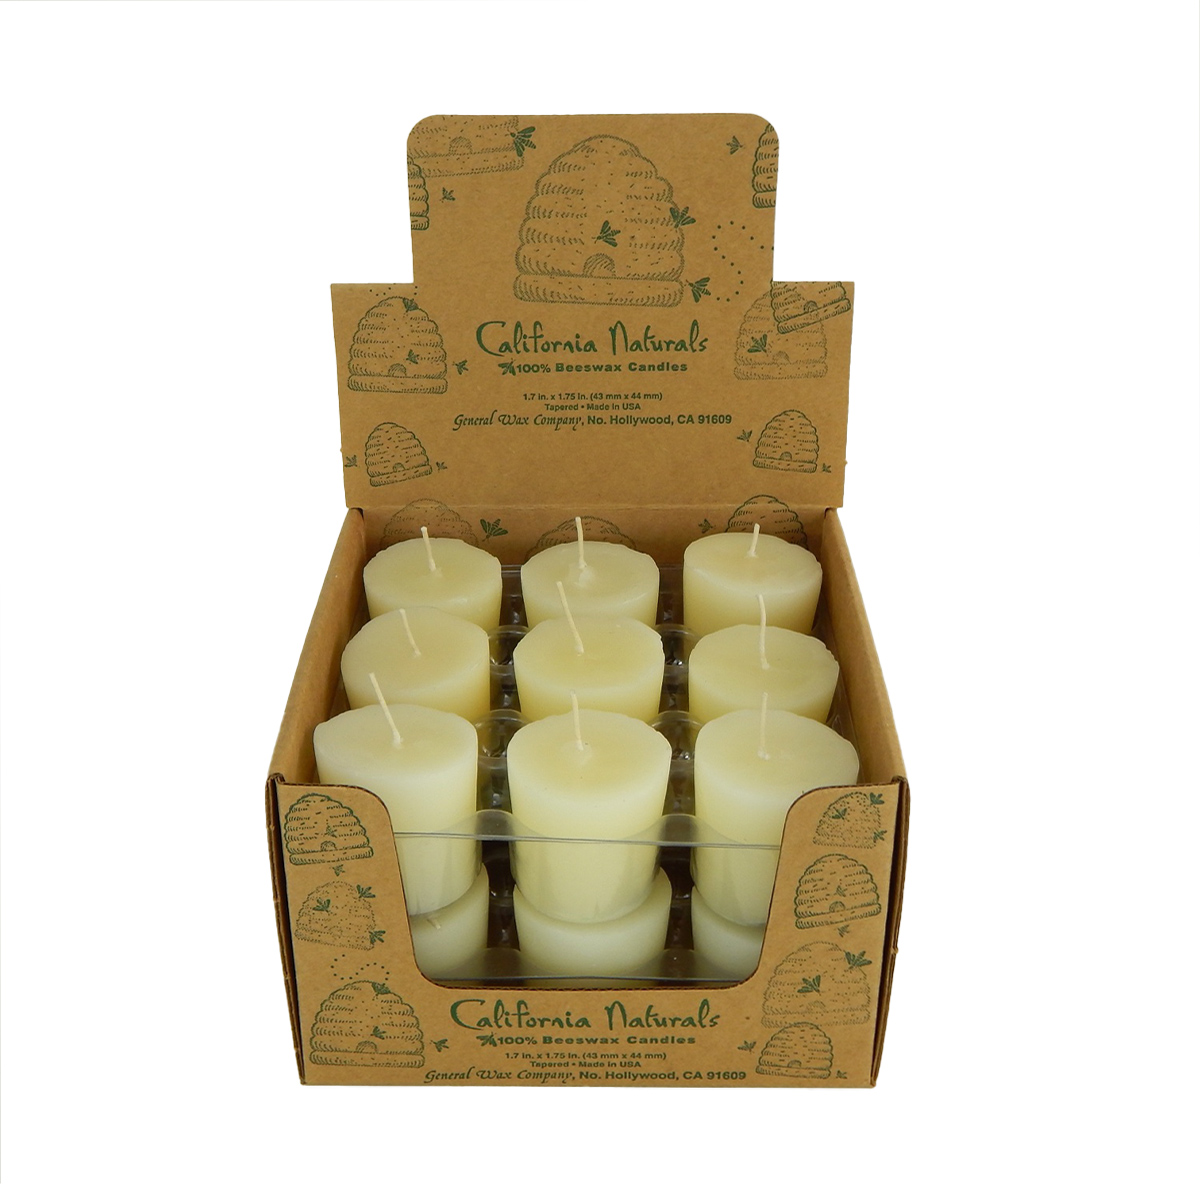 Each 100% beeswax Pure Beeswax Votive Candles